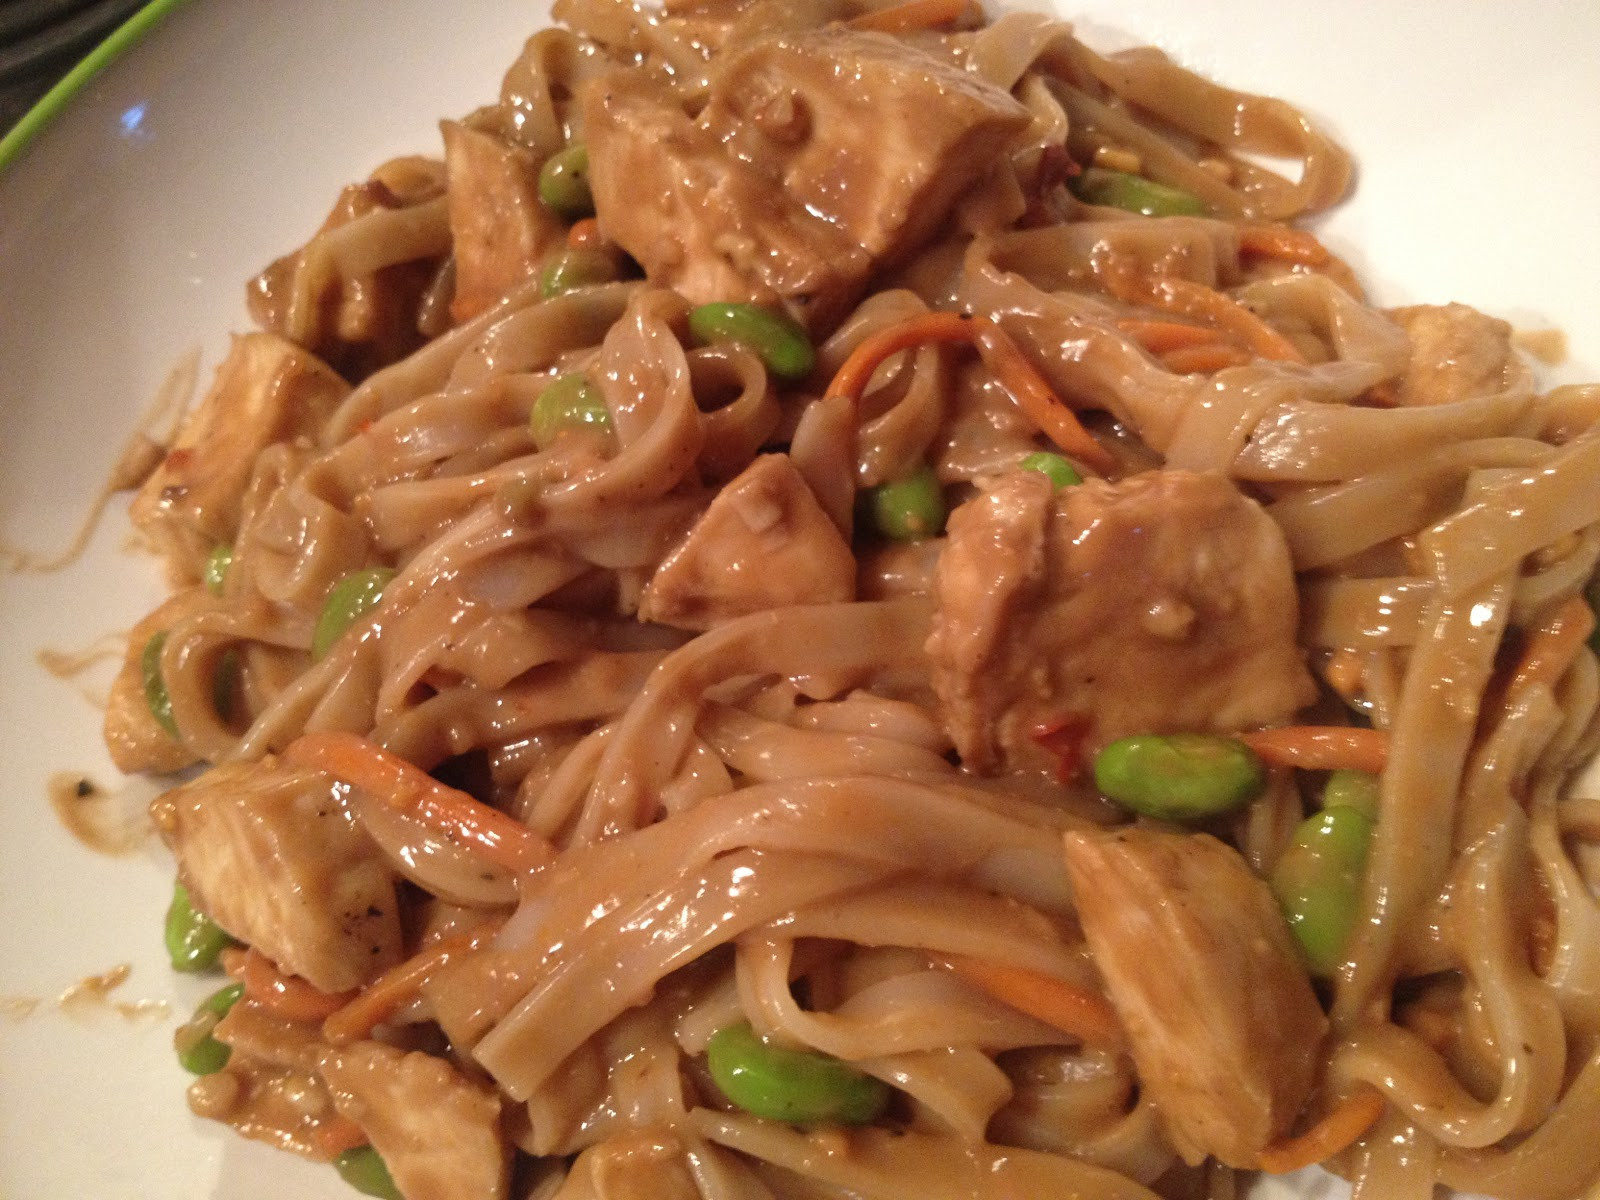 Rice Noodles With Peanut Sauce
 Now I Sit Me Down To Eat Thai Peanut Butter Chicken with